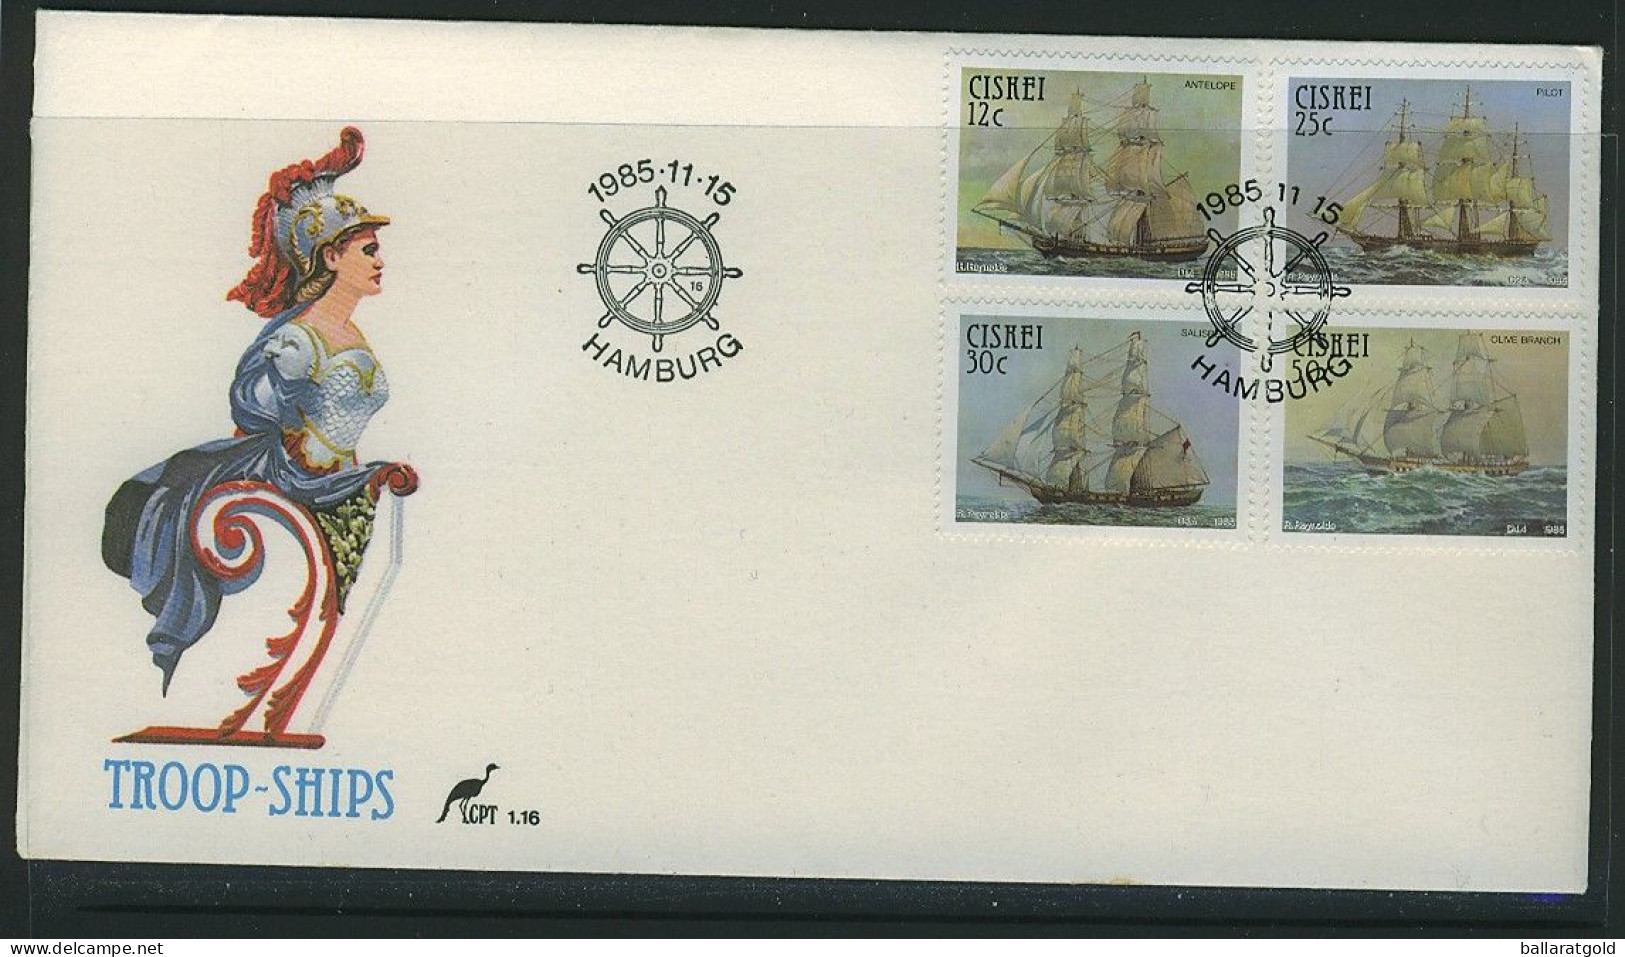 Ciskei 1985 Troop Ships First Day Cover 1.16 - Ciskei